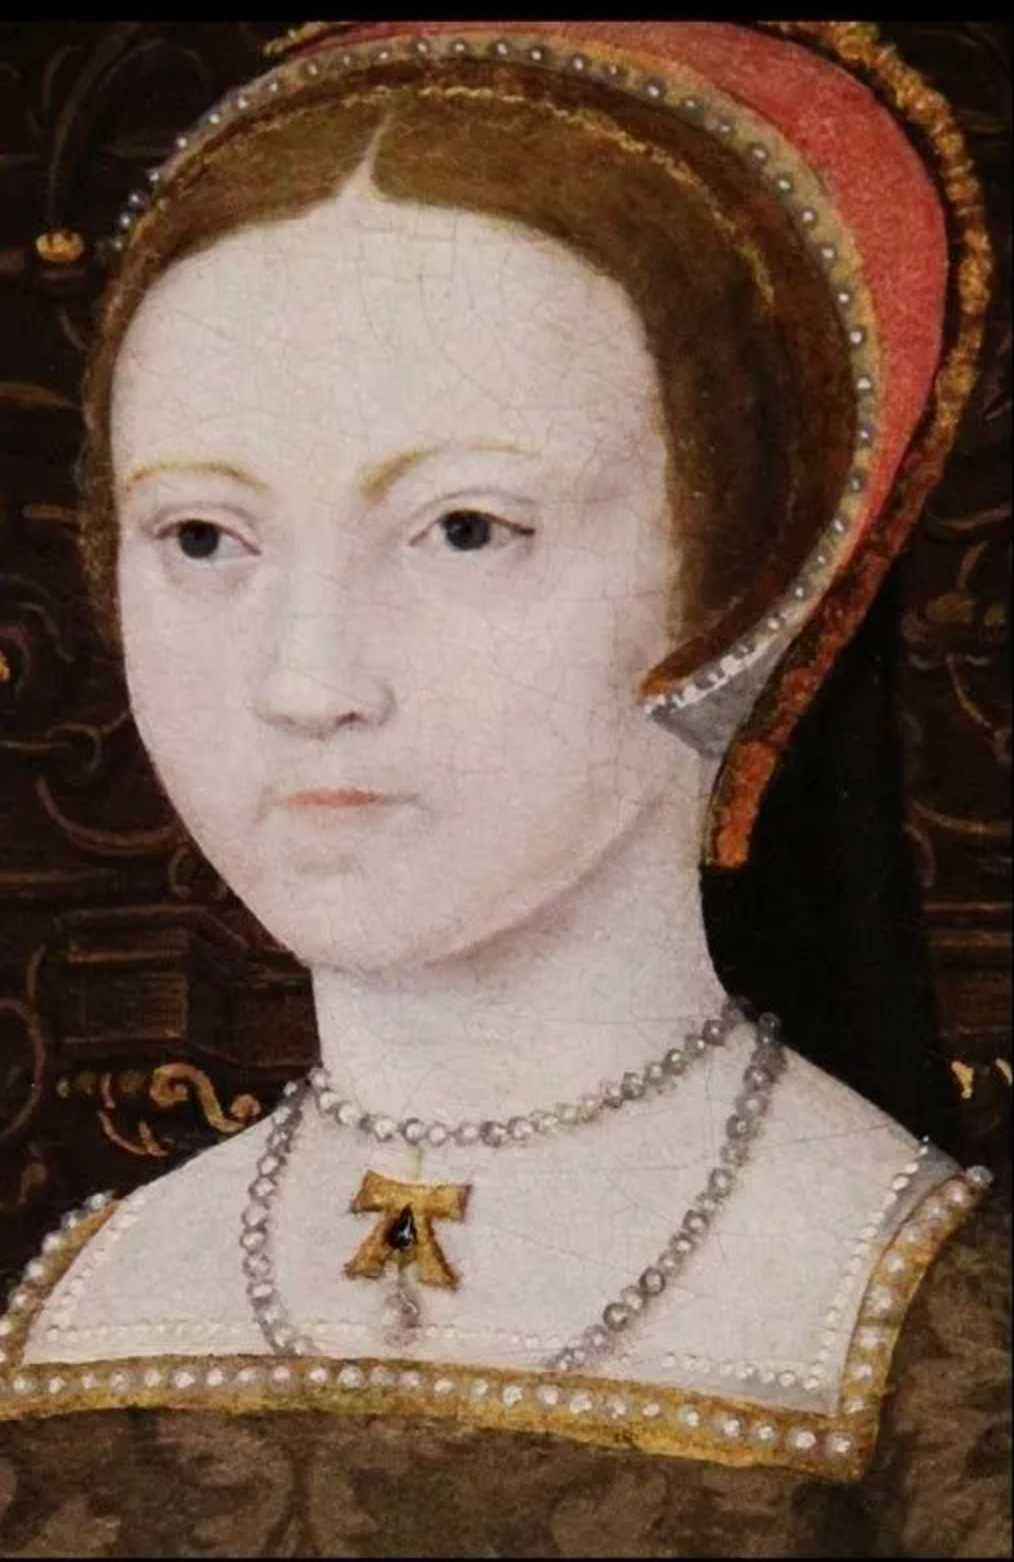 Queen Elizabeth I as a teenager wearing what is believed to be an ‘A’ pendant belonging to her late mother, Anne Boleyn. detail from “The Family of Henry VIII,” c. 1545.